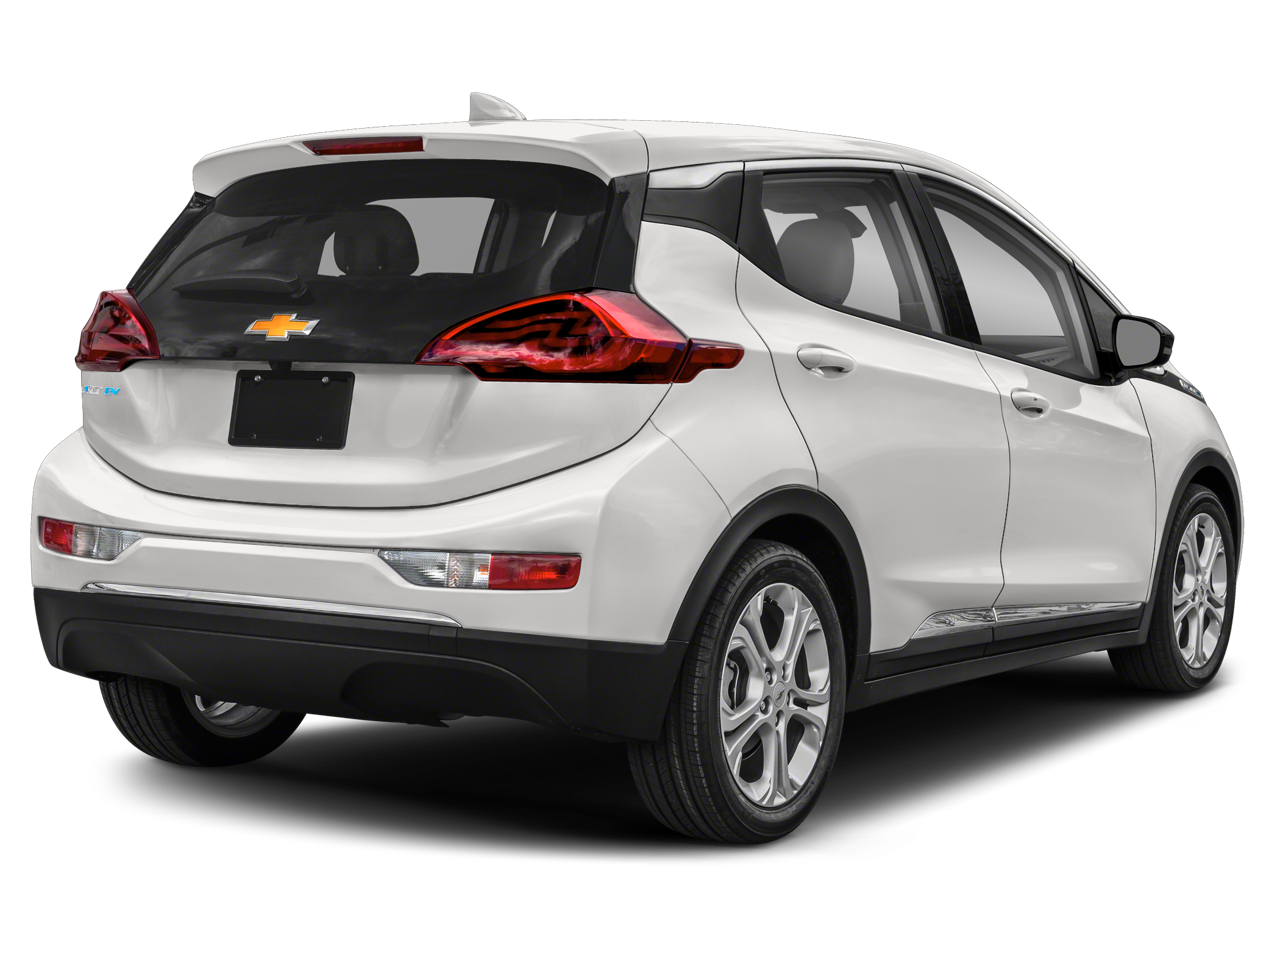 Used 2020 Chevrolet Bolt EV LT with VIN 1G1FY6S03L4143775 for sale in Watsonville, CA